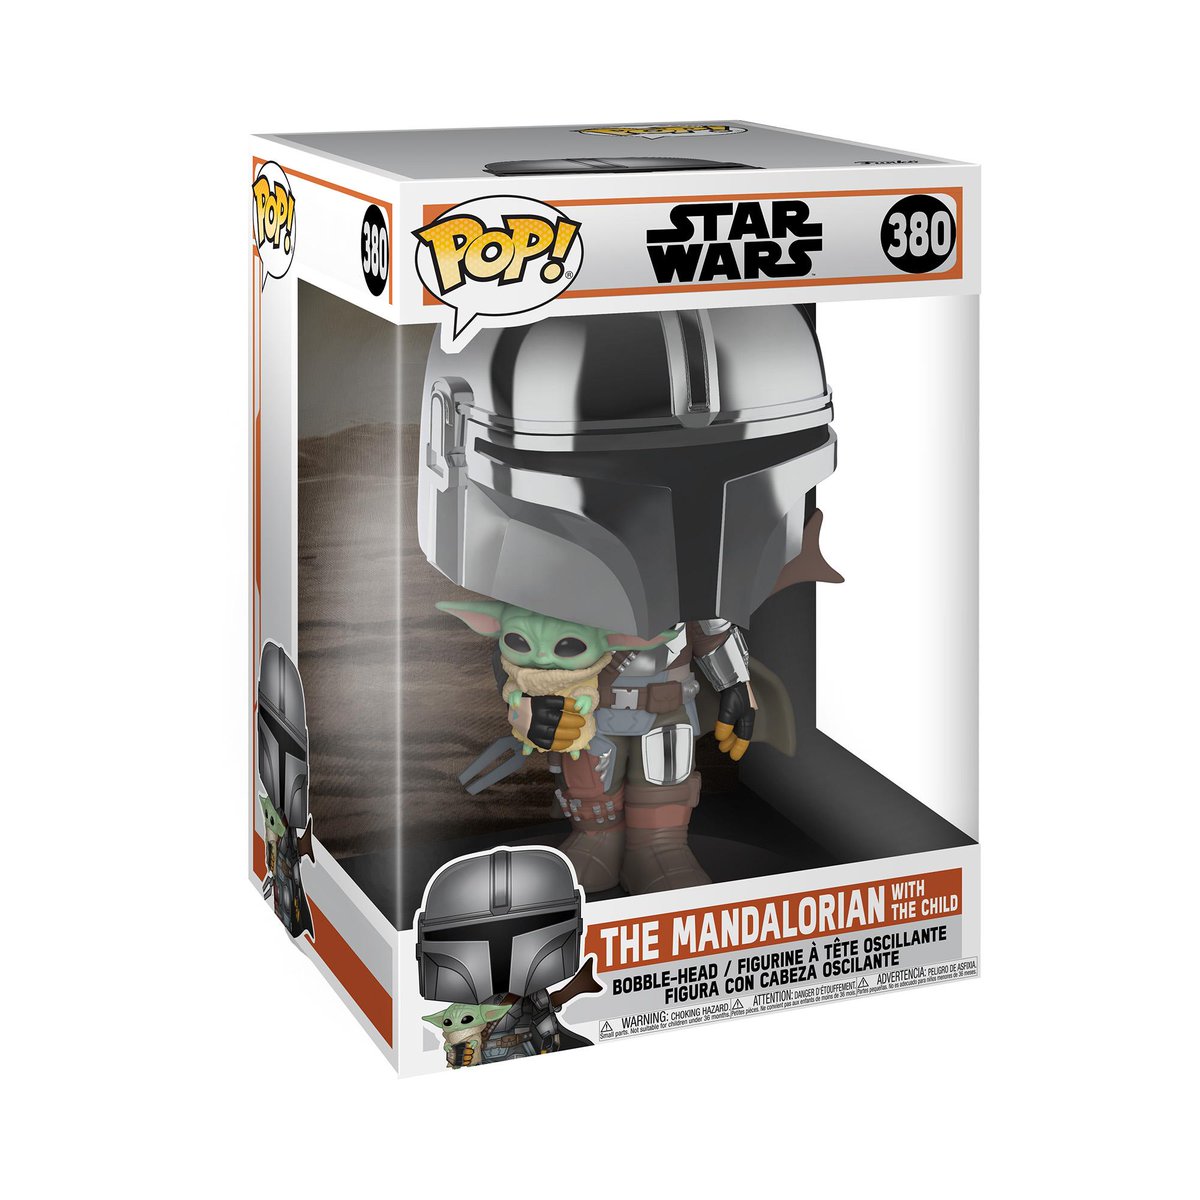 RT & follow @OriginalFunko for a chance to win this 10' Pop! of The Mandalorian with The Child! Looking to add more of The Mandalorian to your collection? Check out Funko Shop! bit.ly/2R9N5MR
#Funko #Giveaway #TheMandalorian #TheChild #Mandalorian